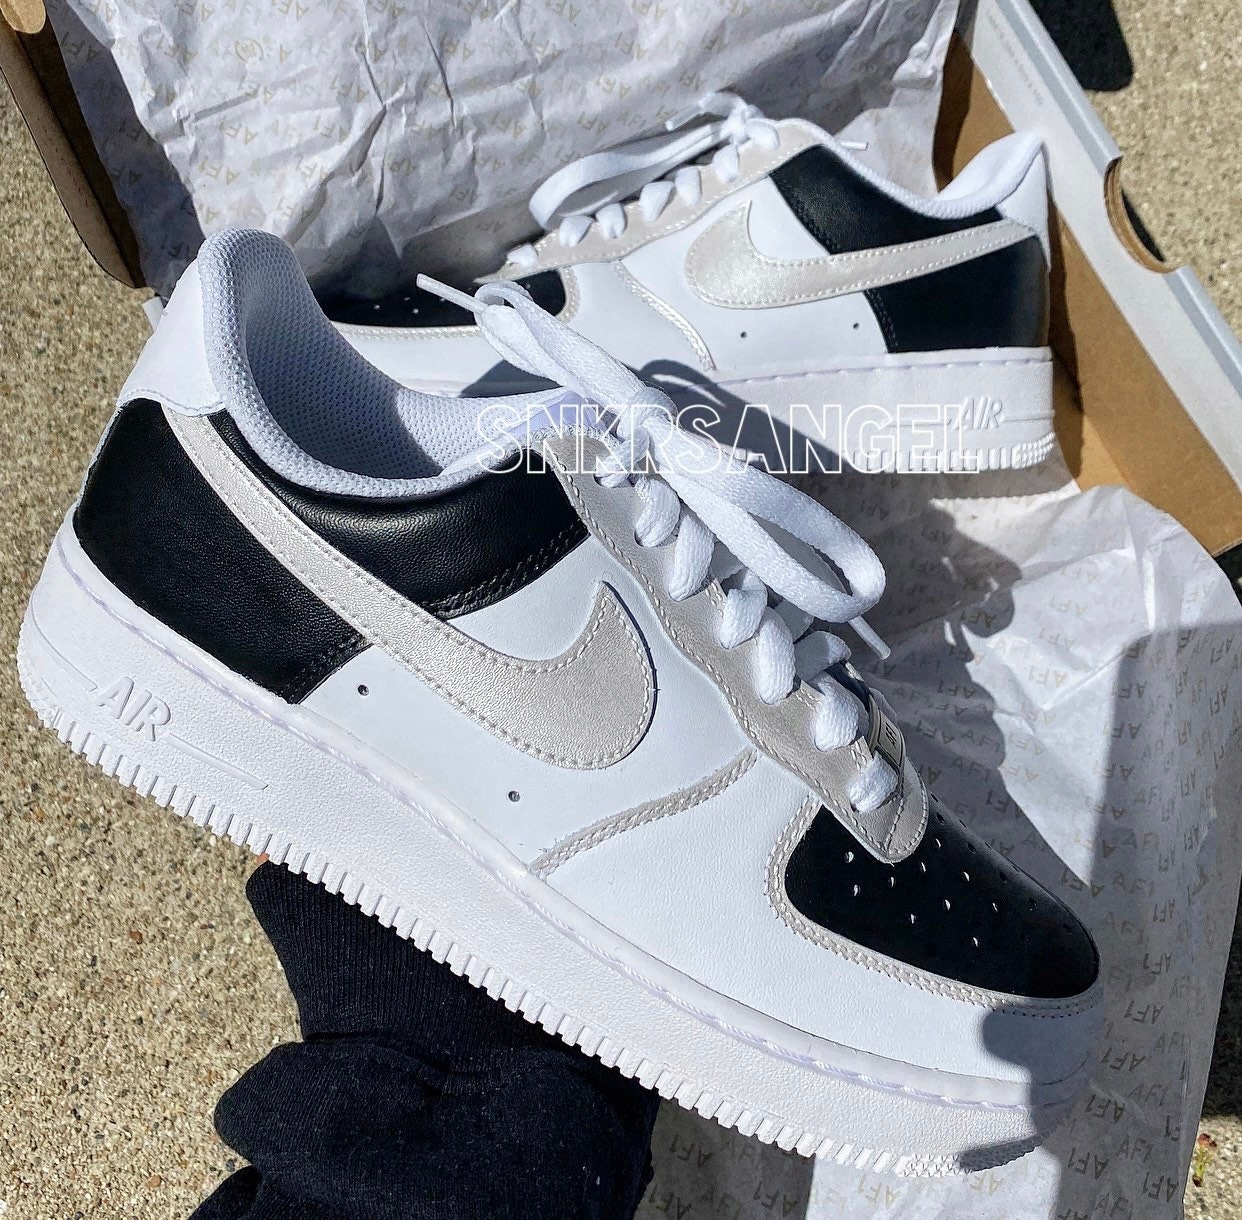 Nike Air Force 1 Low Multi-swoosh for Sale, Authenticity Guaranteed